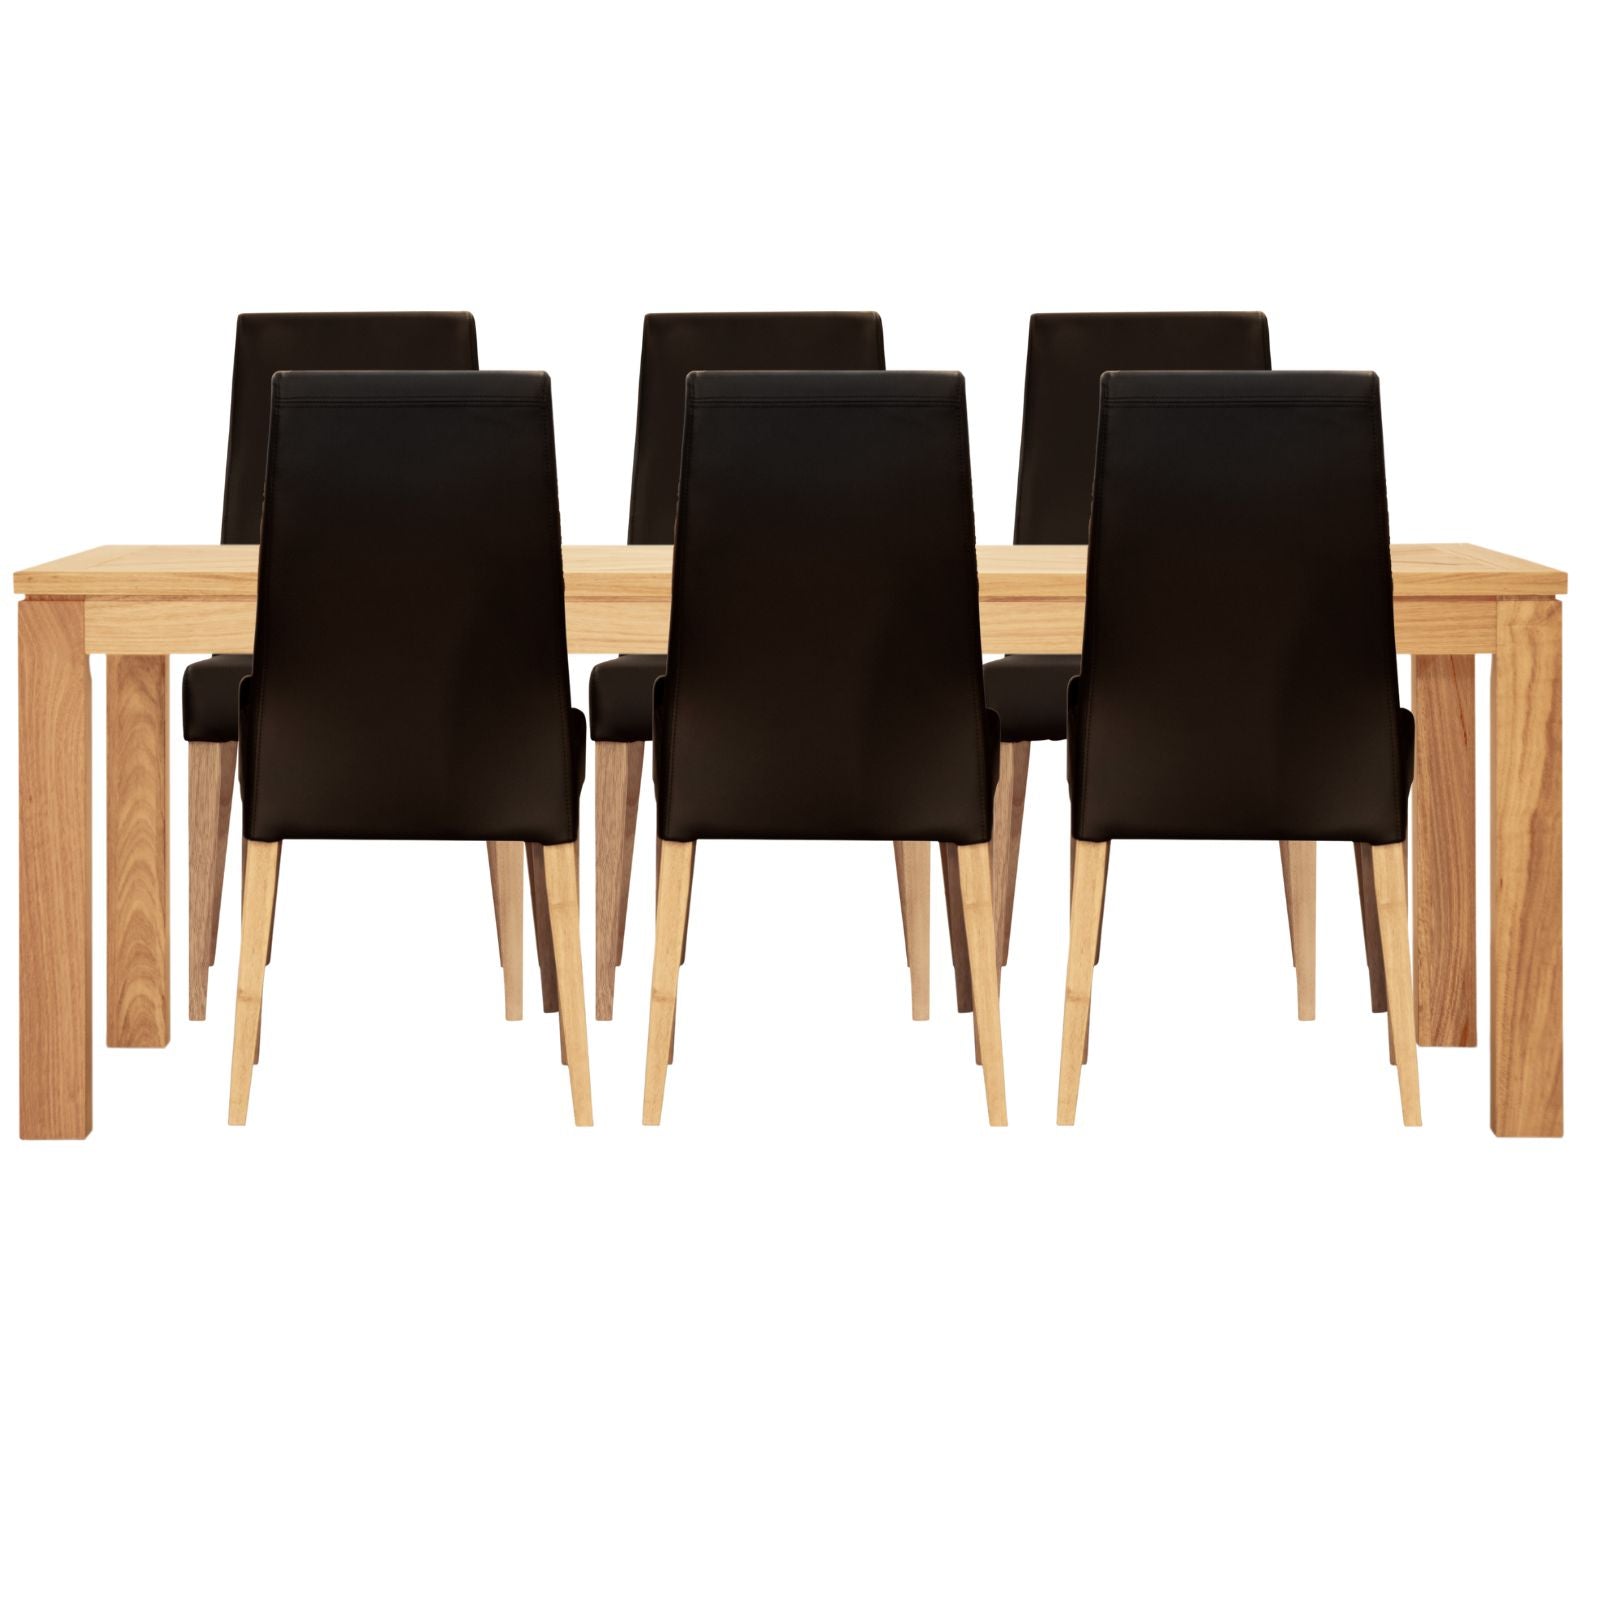 Rosemallow 7pc Dining Set 180cm Table 6 Black PU Chair Solid Messmate Timber